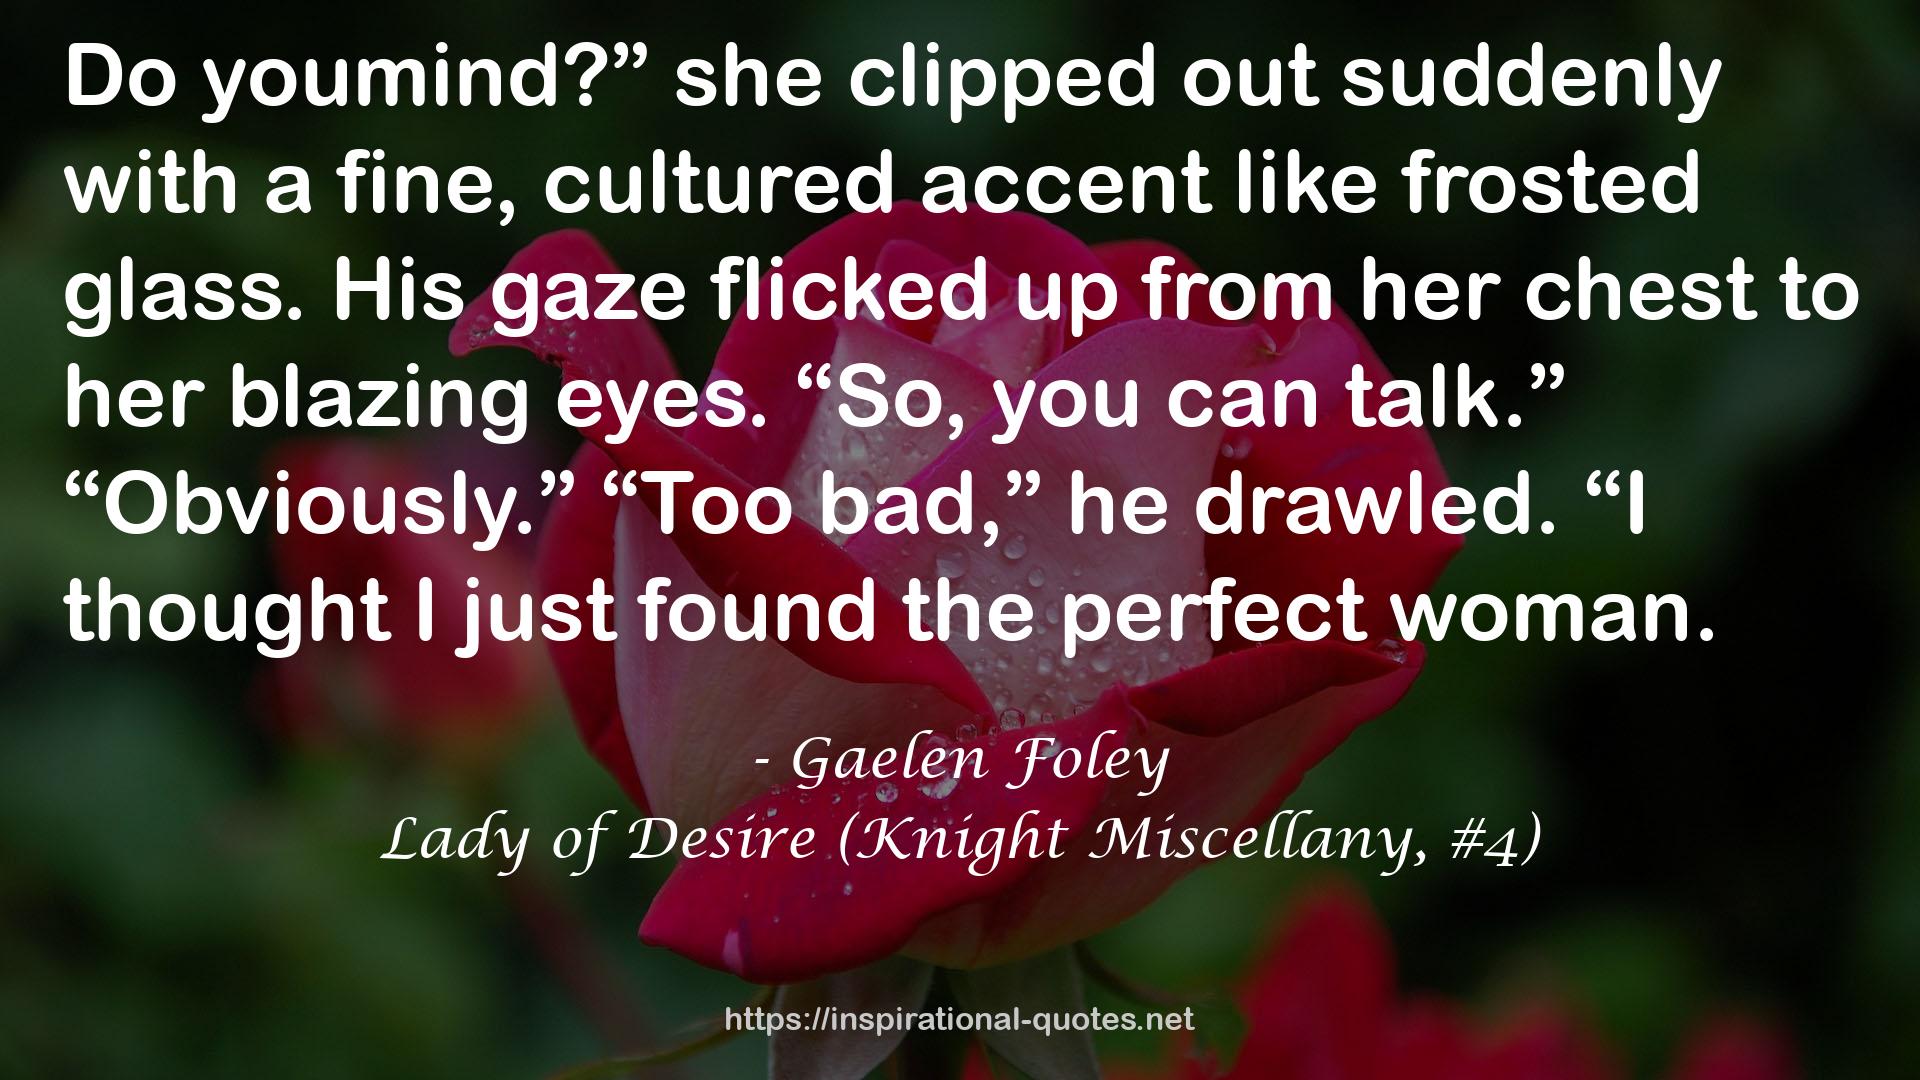 Lady of Desire (Knight Miscellany, #4) QUOTES